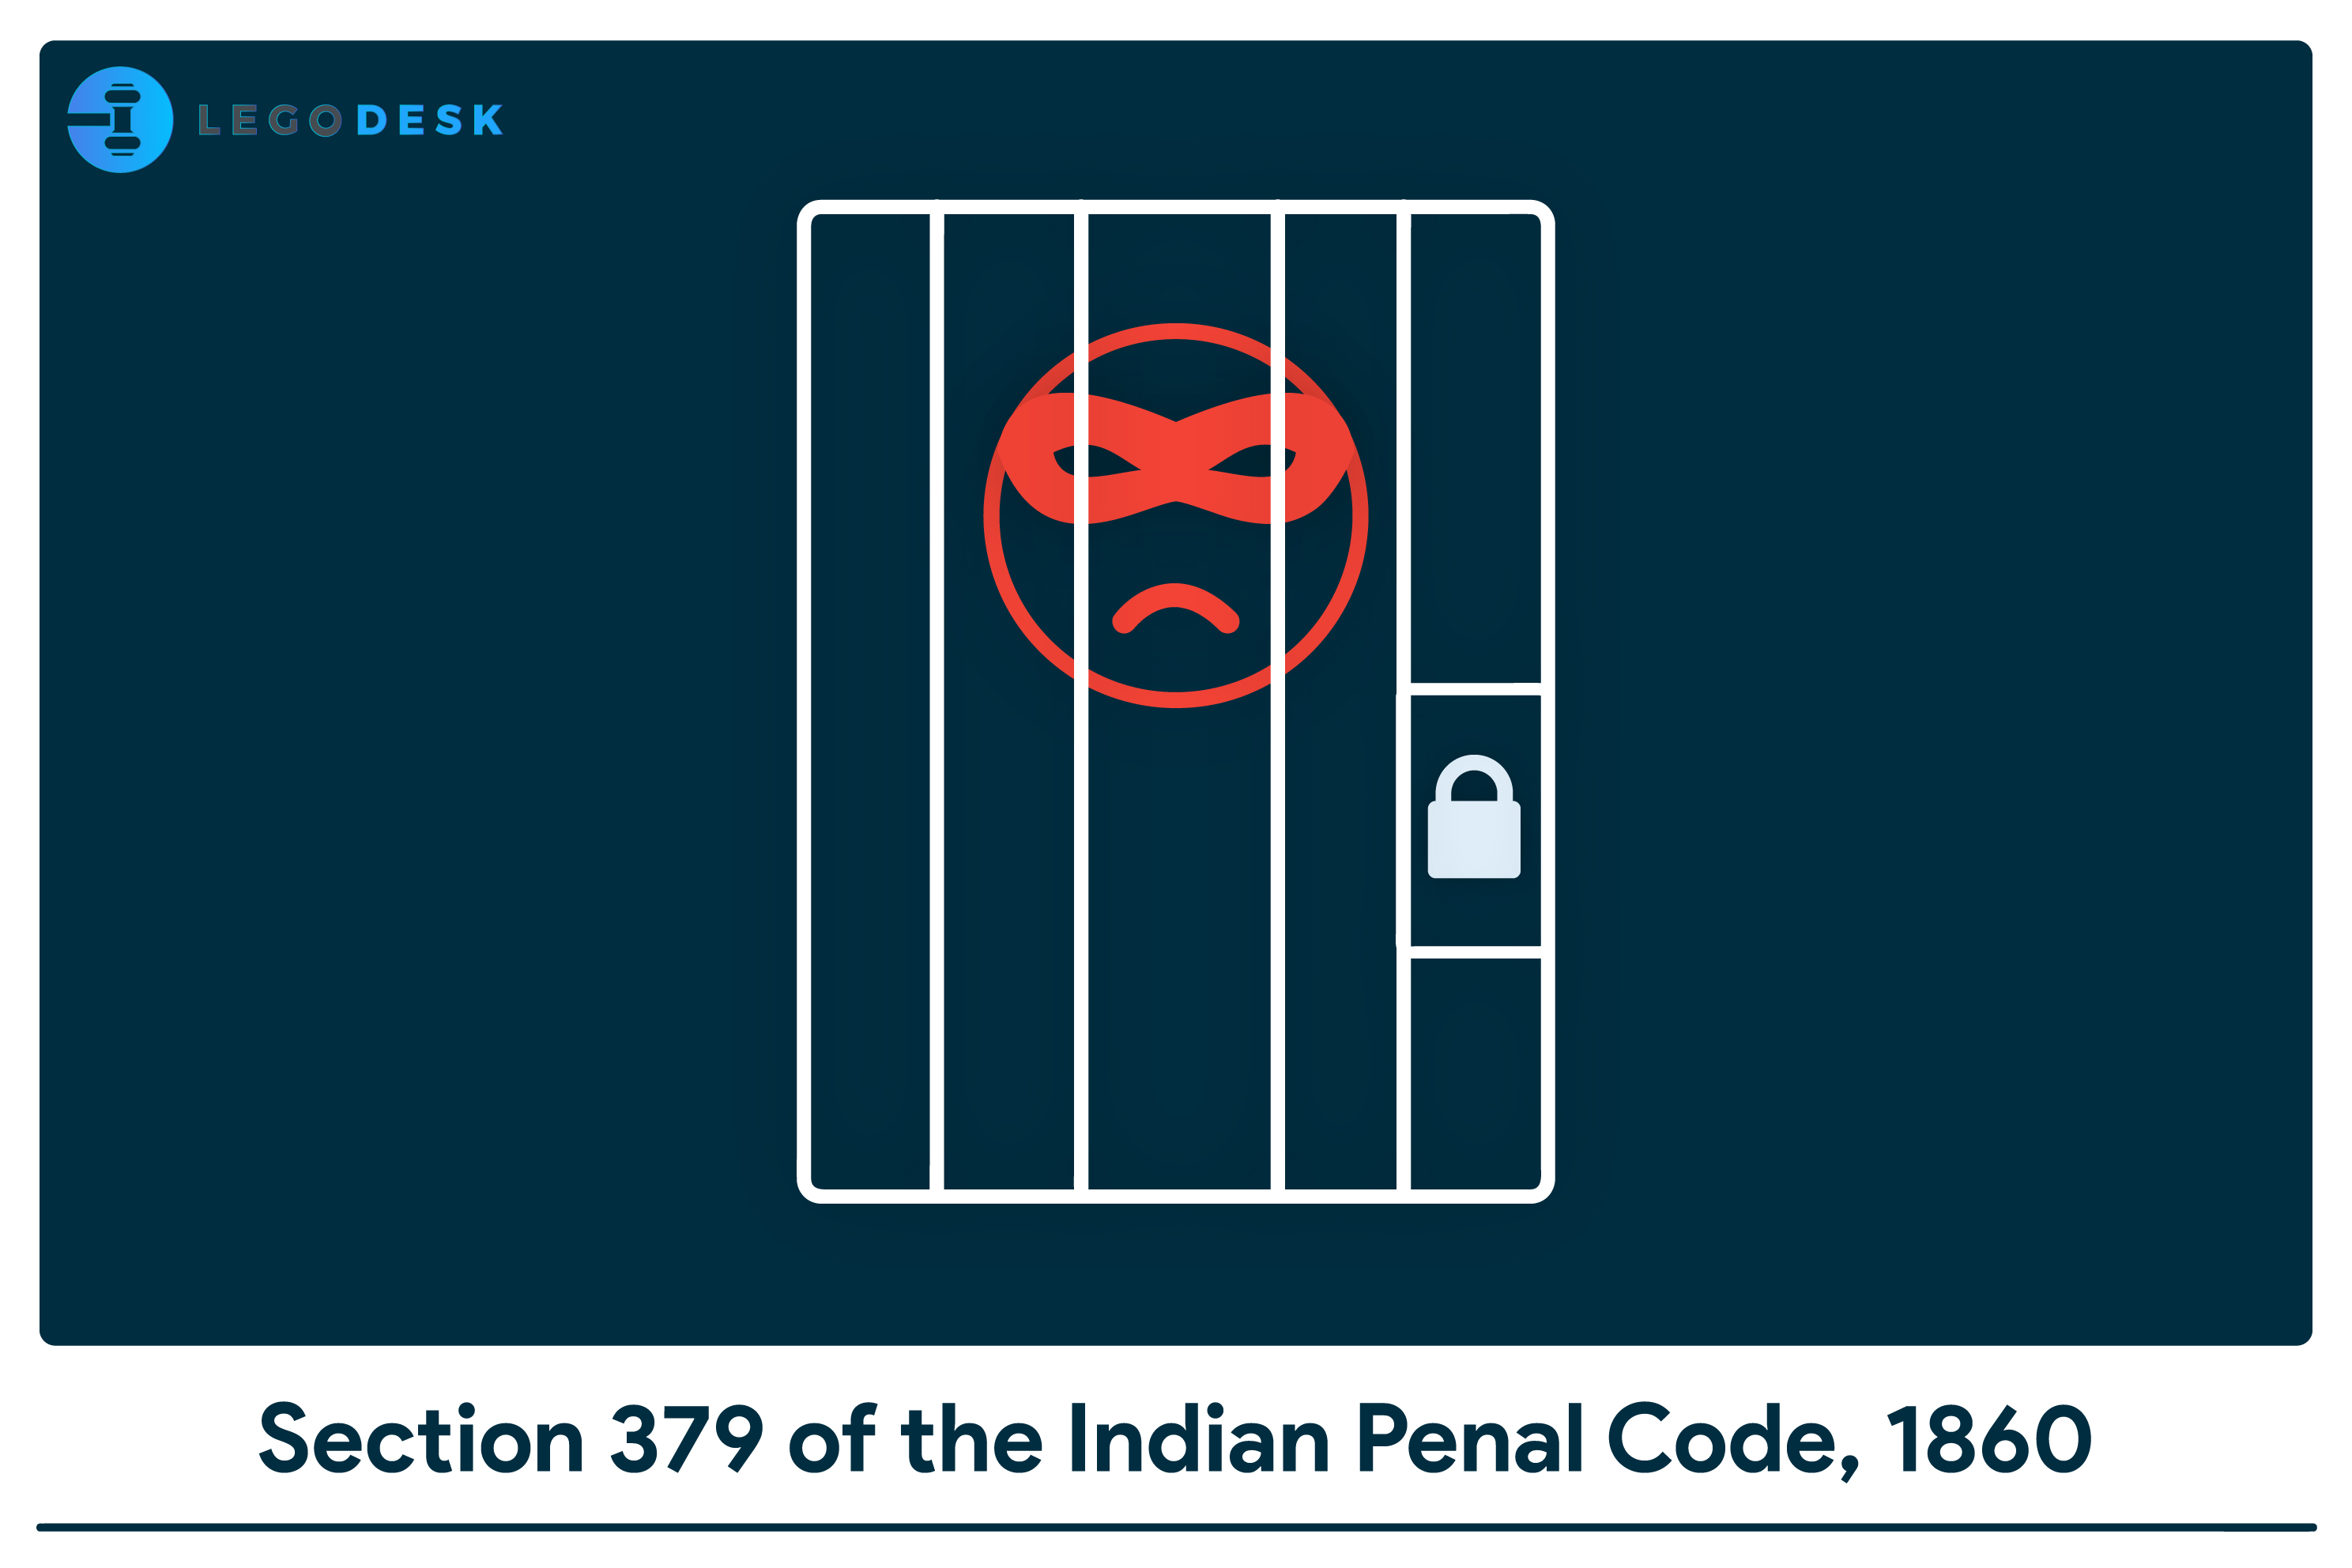 Section 379 of the Indian Penal Code, 1860